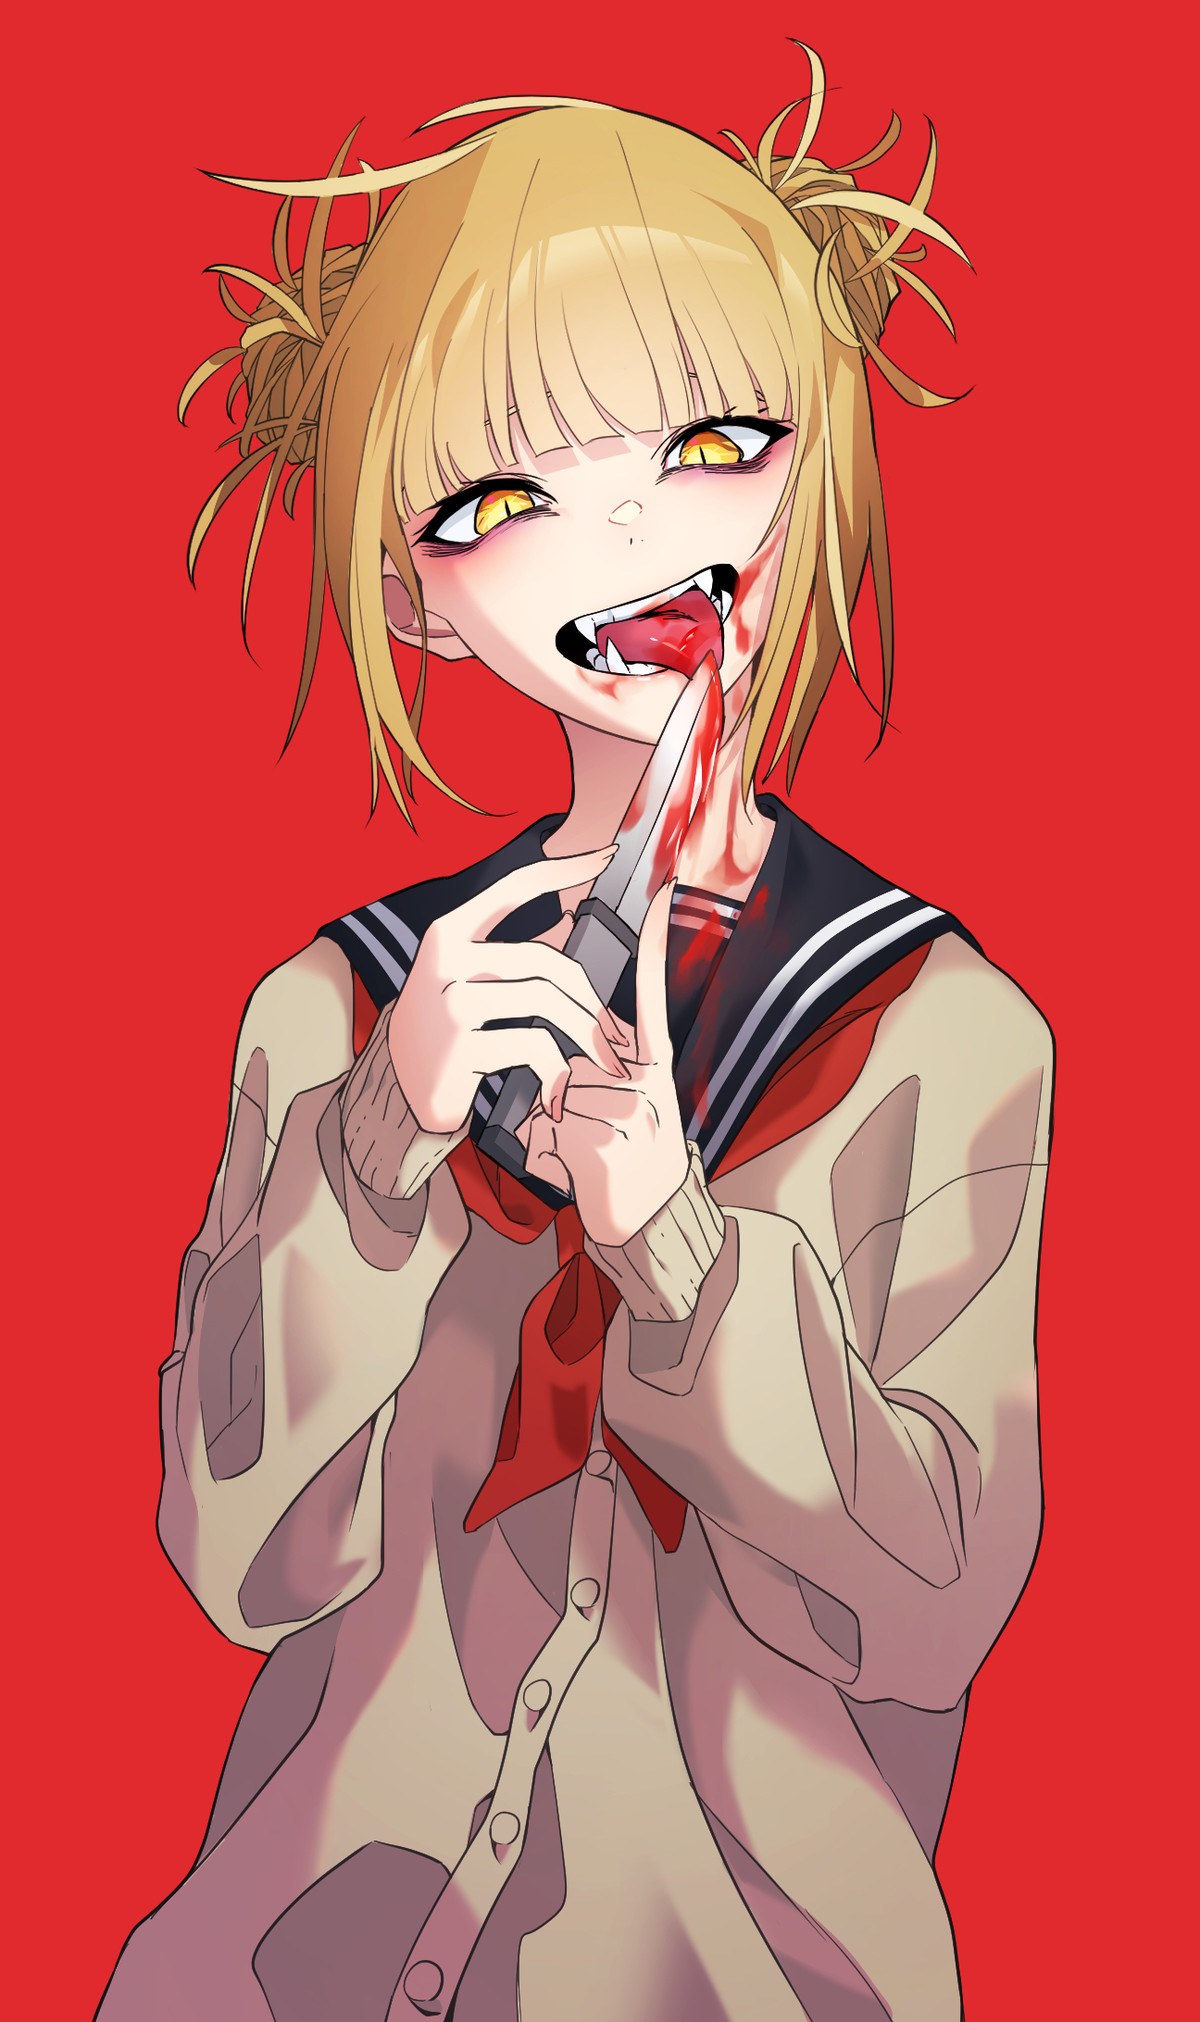 Daily Toga - 973: Knife Licker. join list: DailyToga (477 subs)Mention History Source: .. Toga, that's just unsanitary. i know your insane, but do you want AIDS?